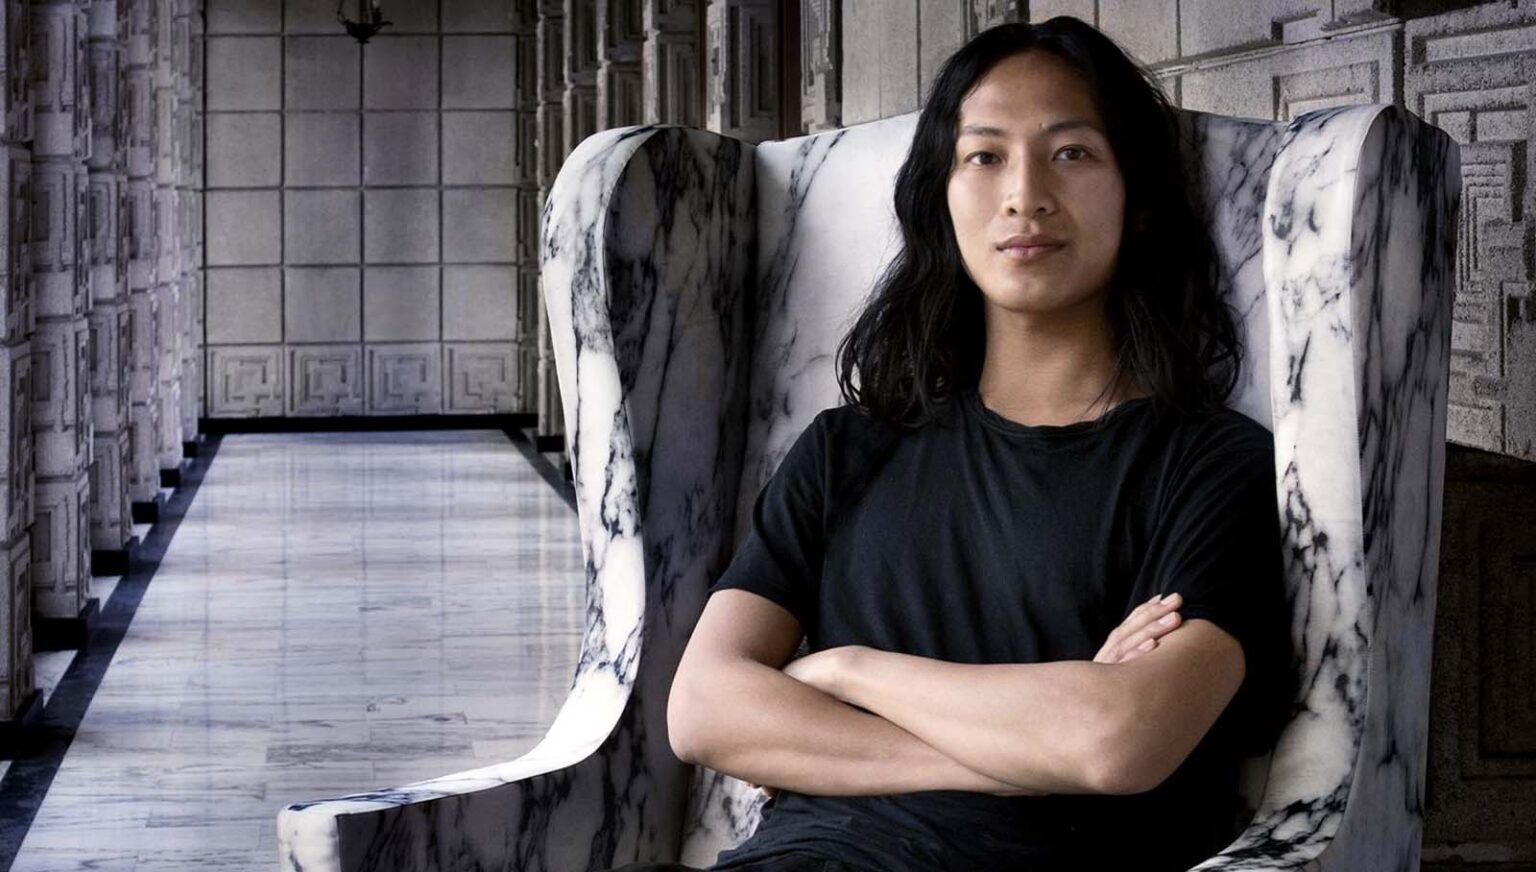 In this day and age you'd think people would know to keep their hands to themselves. However, Alexander Wang is now being accused of assault.